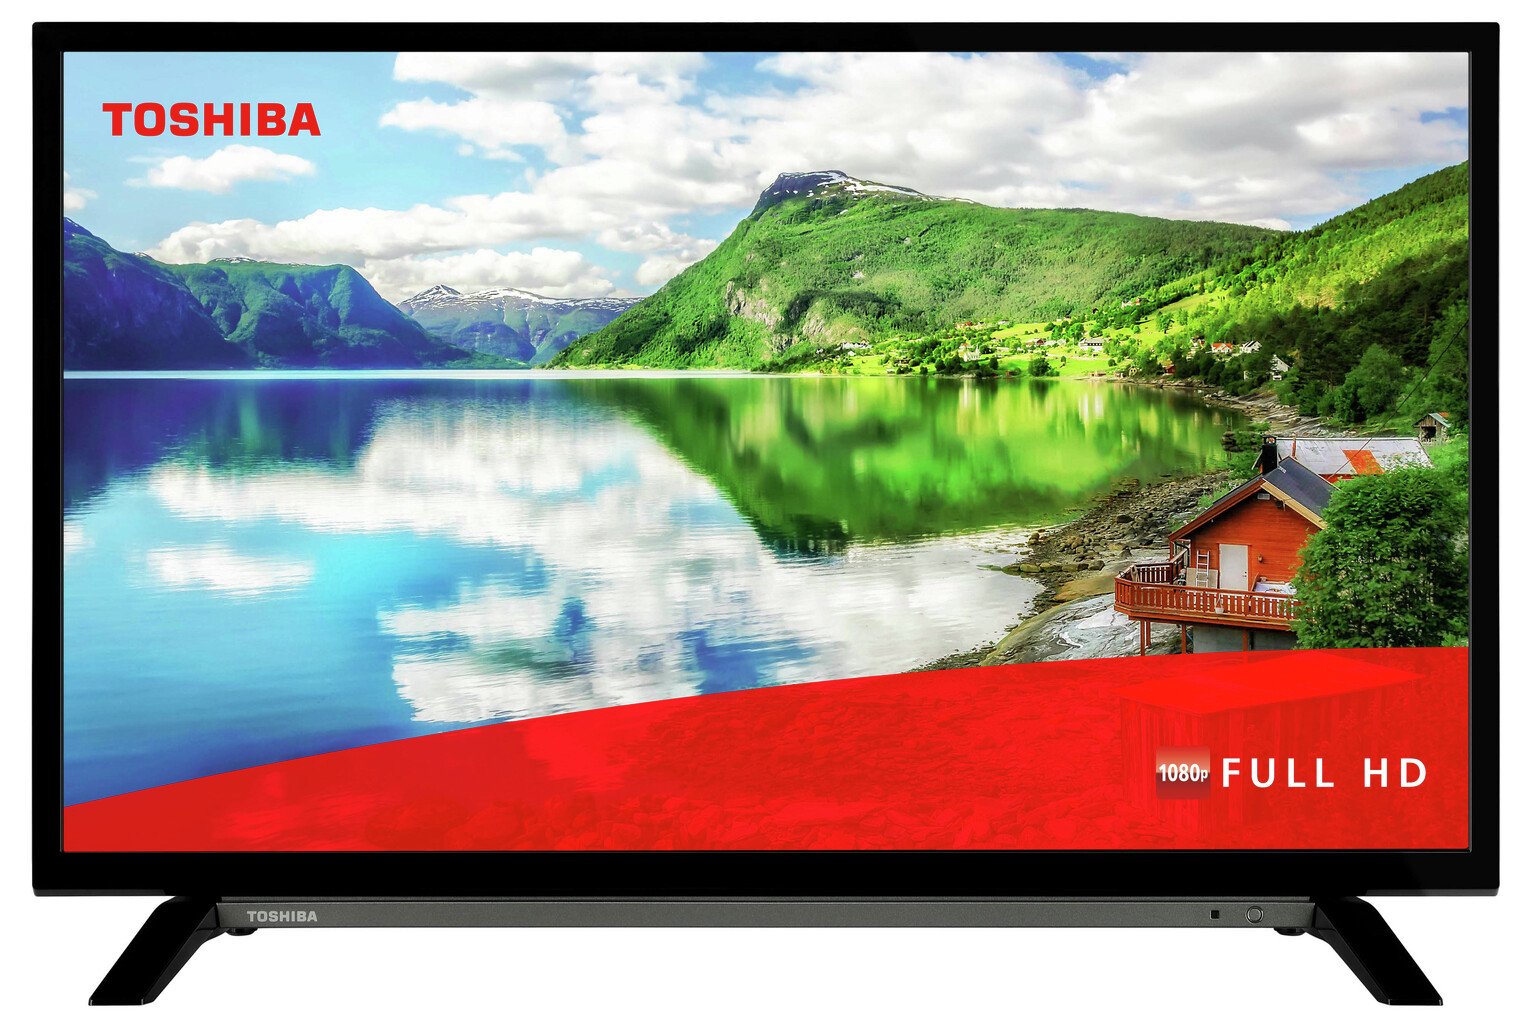 Toshiba 32 Inch Smart Full HD LED TV Review